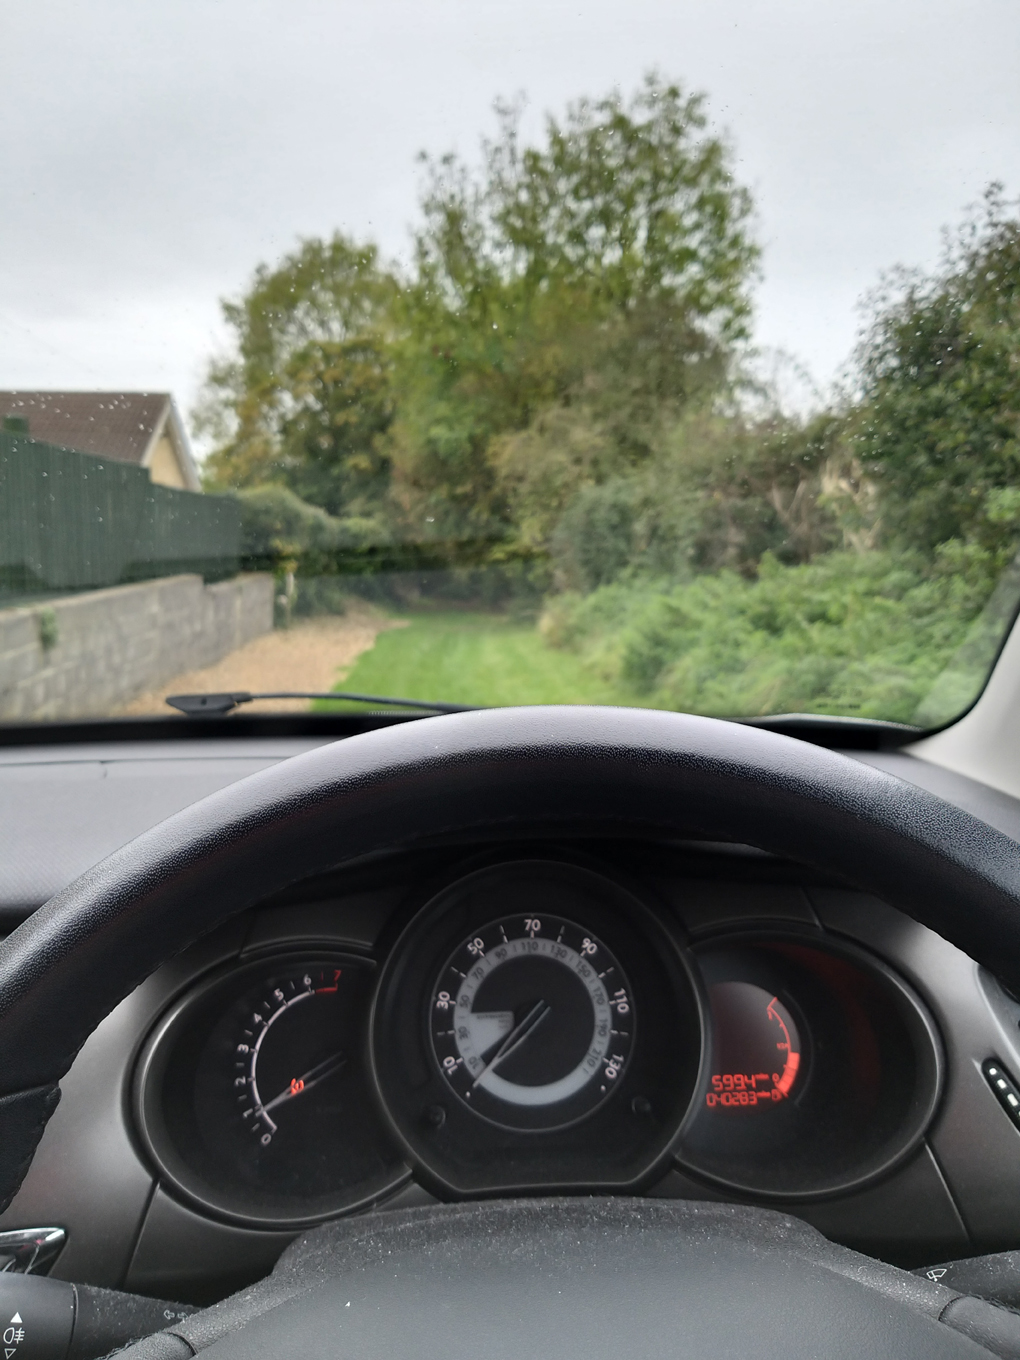 View of a grassy bridle way from my car windscreen